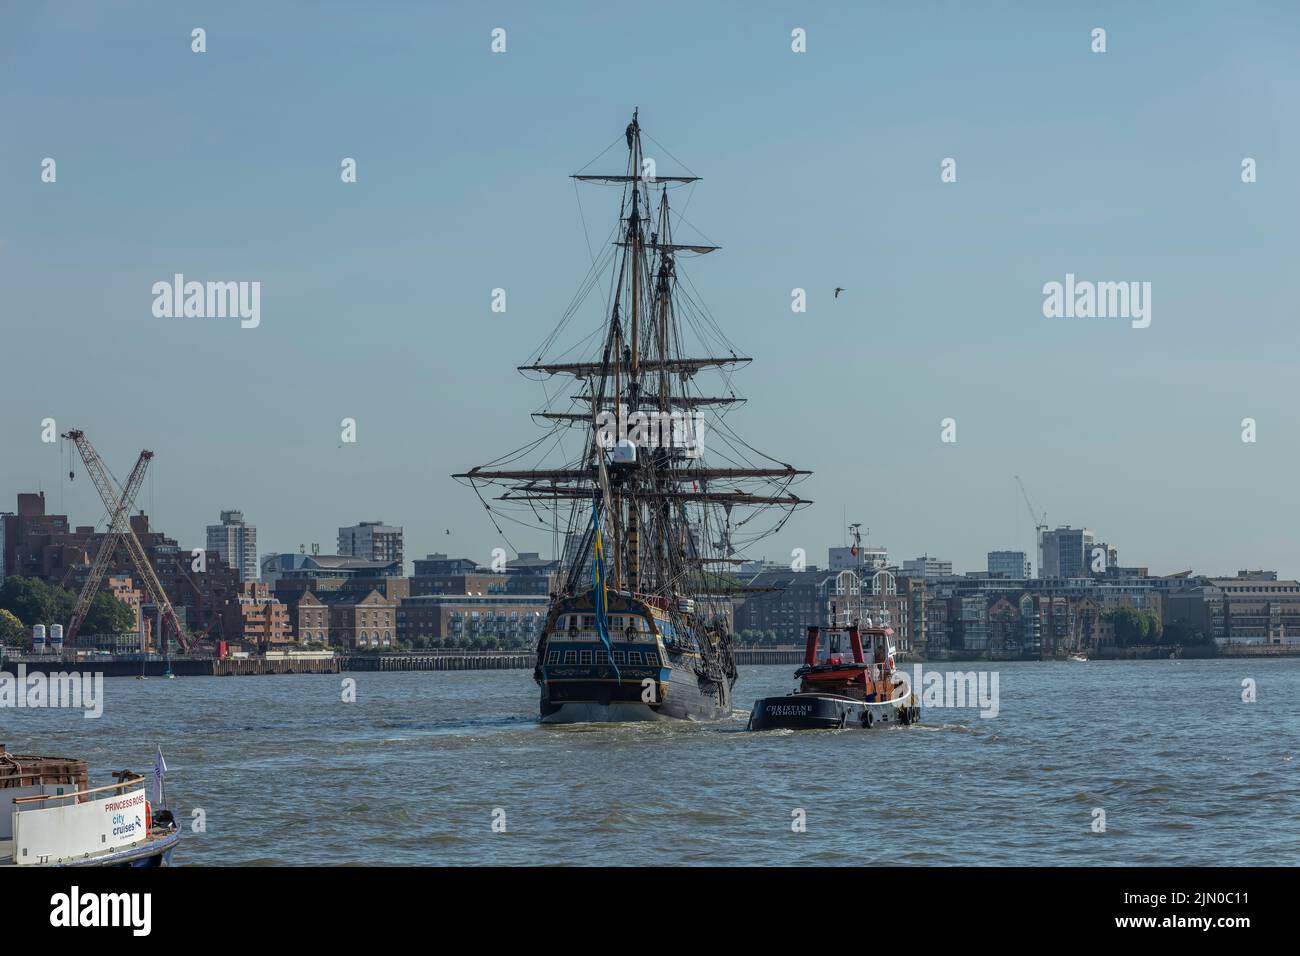 Swedish tall ship Gotheborg sailing on the River Thames towards Canary Wharf with a tug. Stock Photo